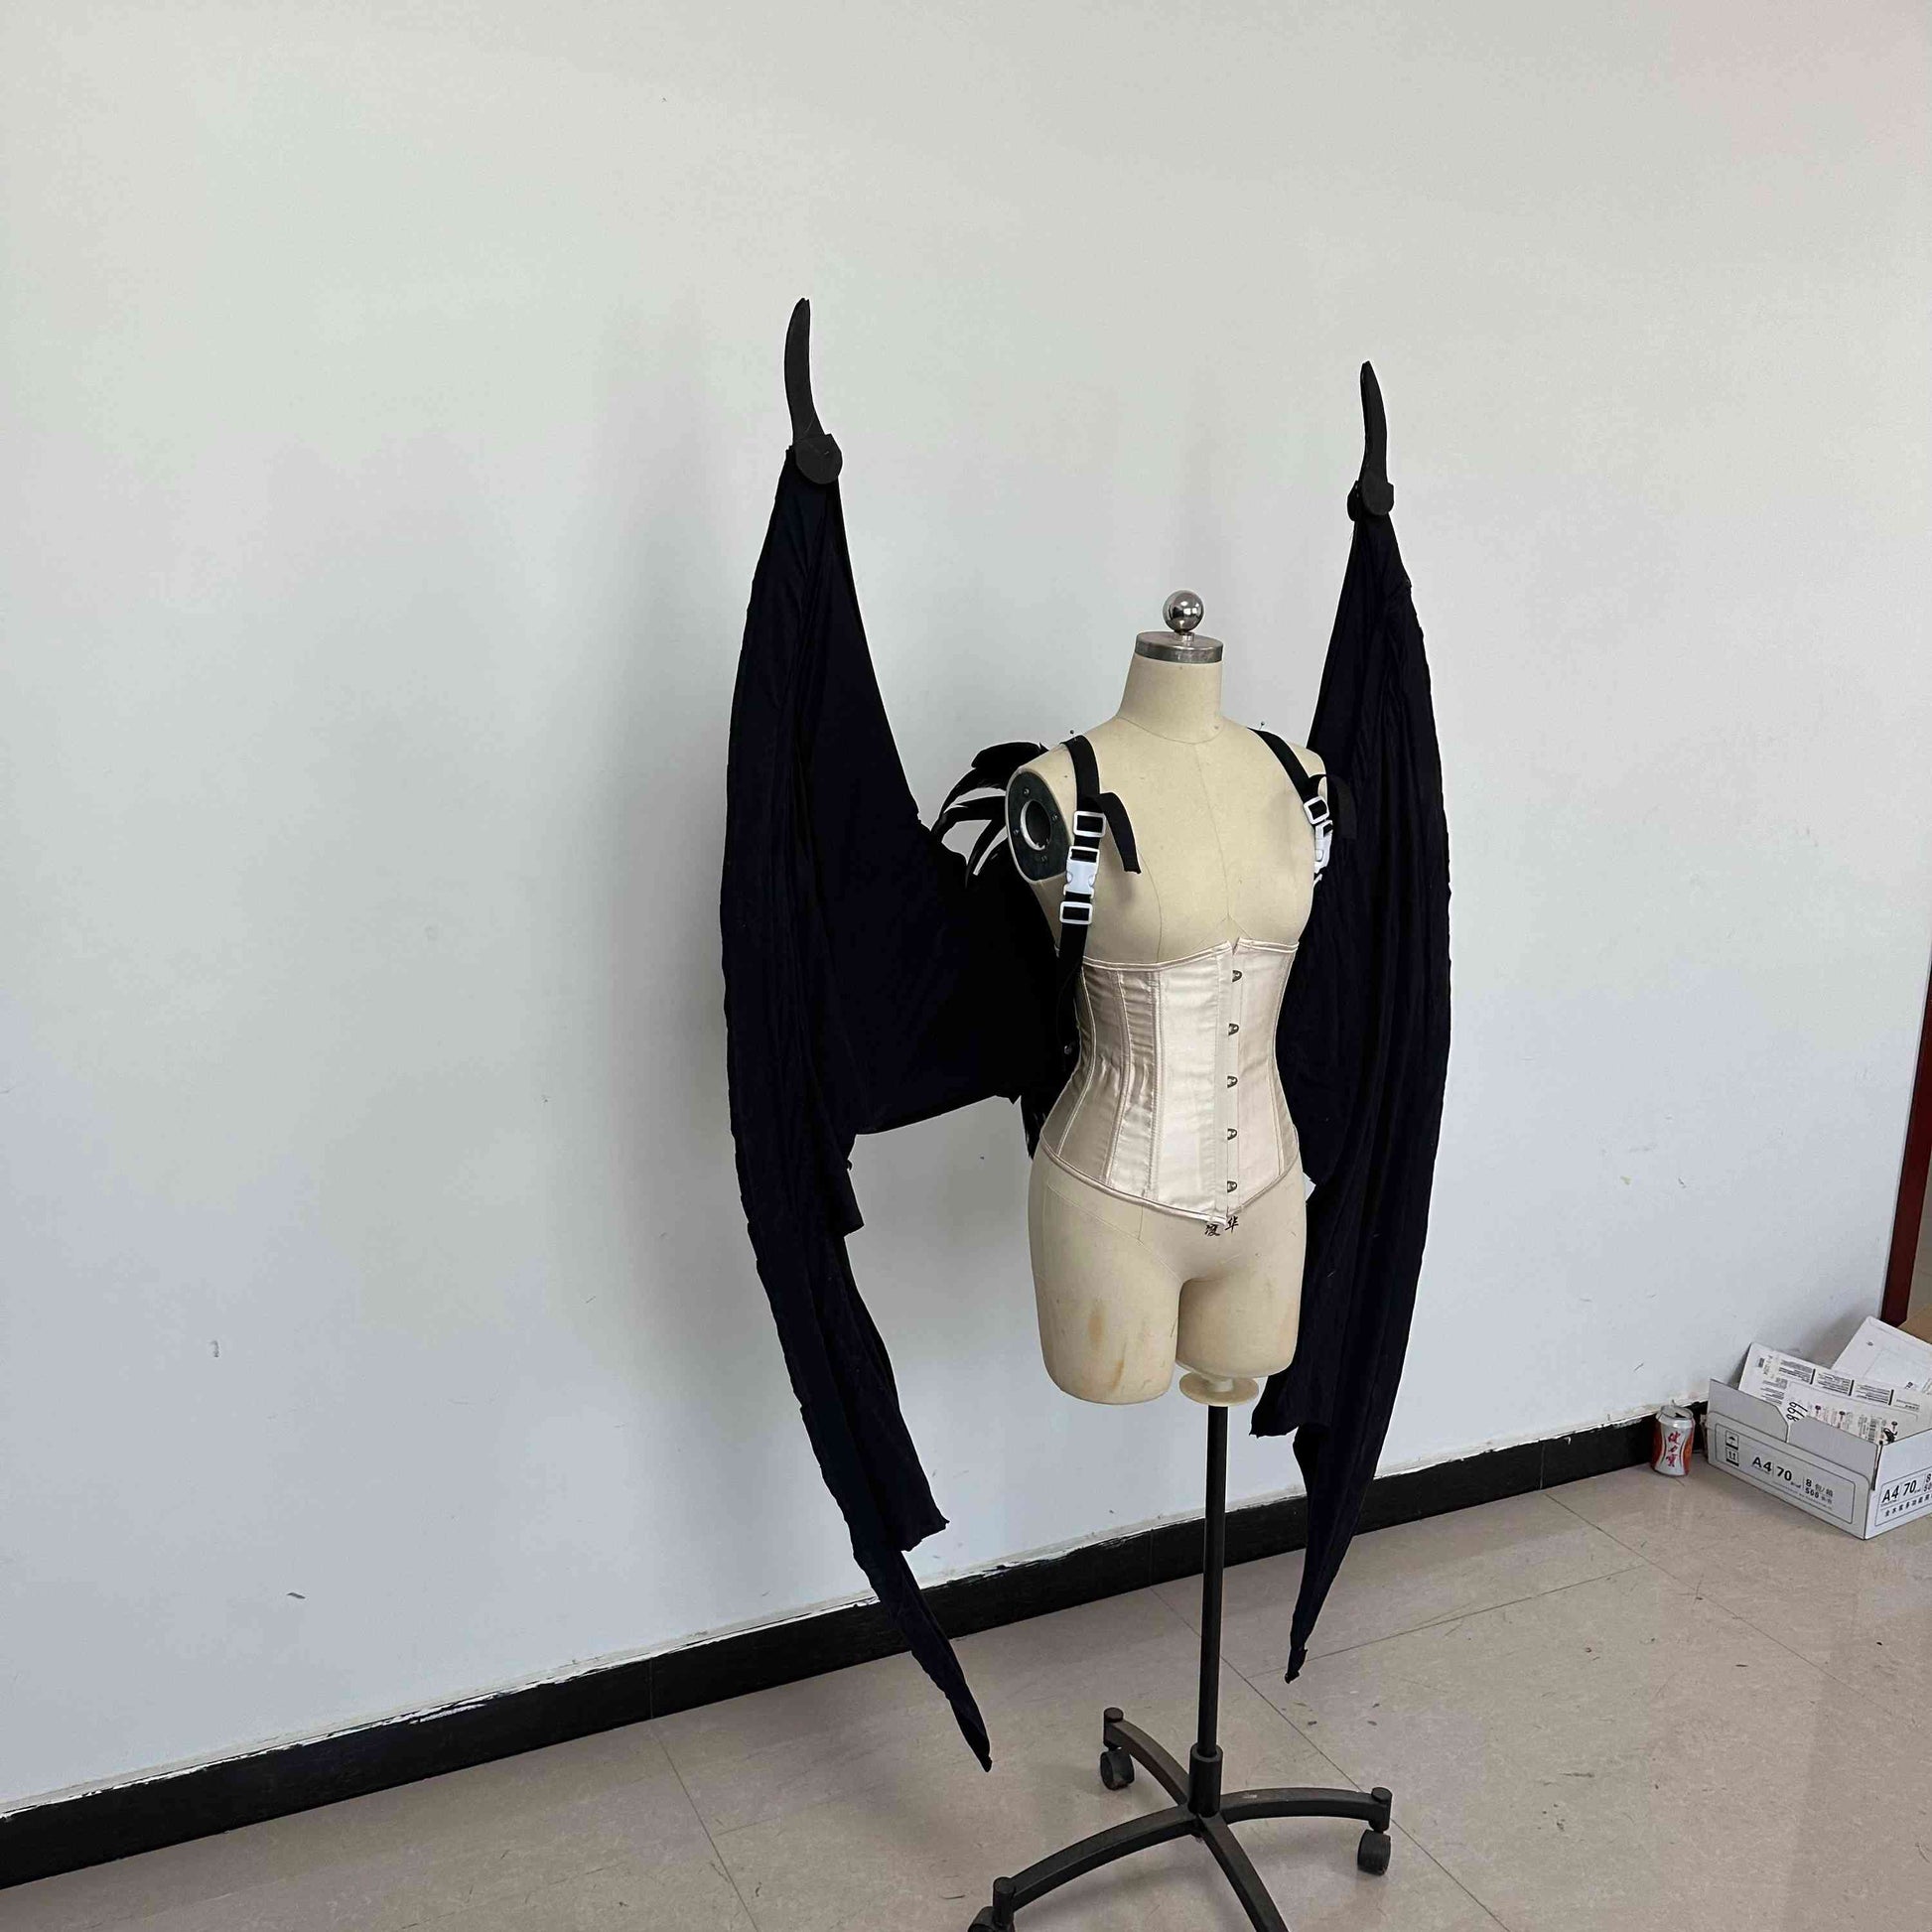 Our large black color devil wings folded from the right side. Wings are moveable and can control extension and folding remotely. Made from aluminum alloy and cloth. Wings for fallen angel costume or devil costume. Suitable for fantasy photoshoots or events.